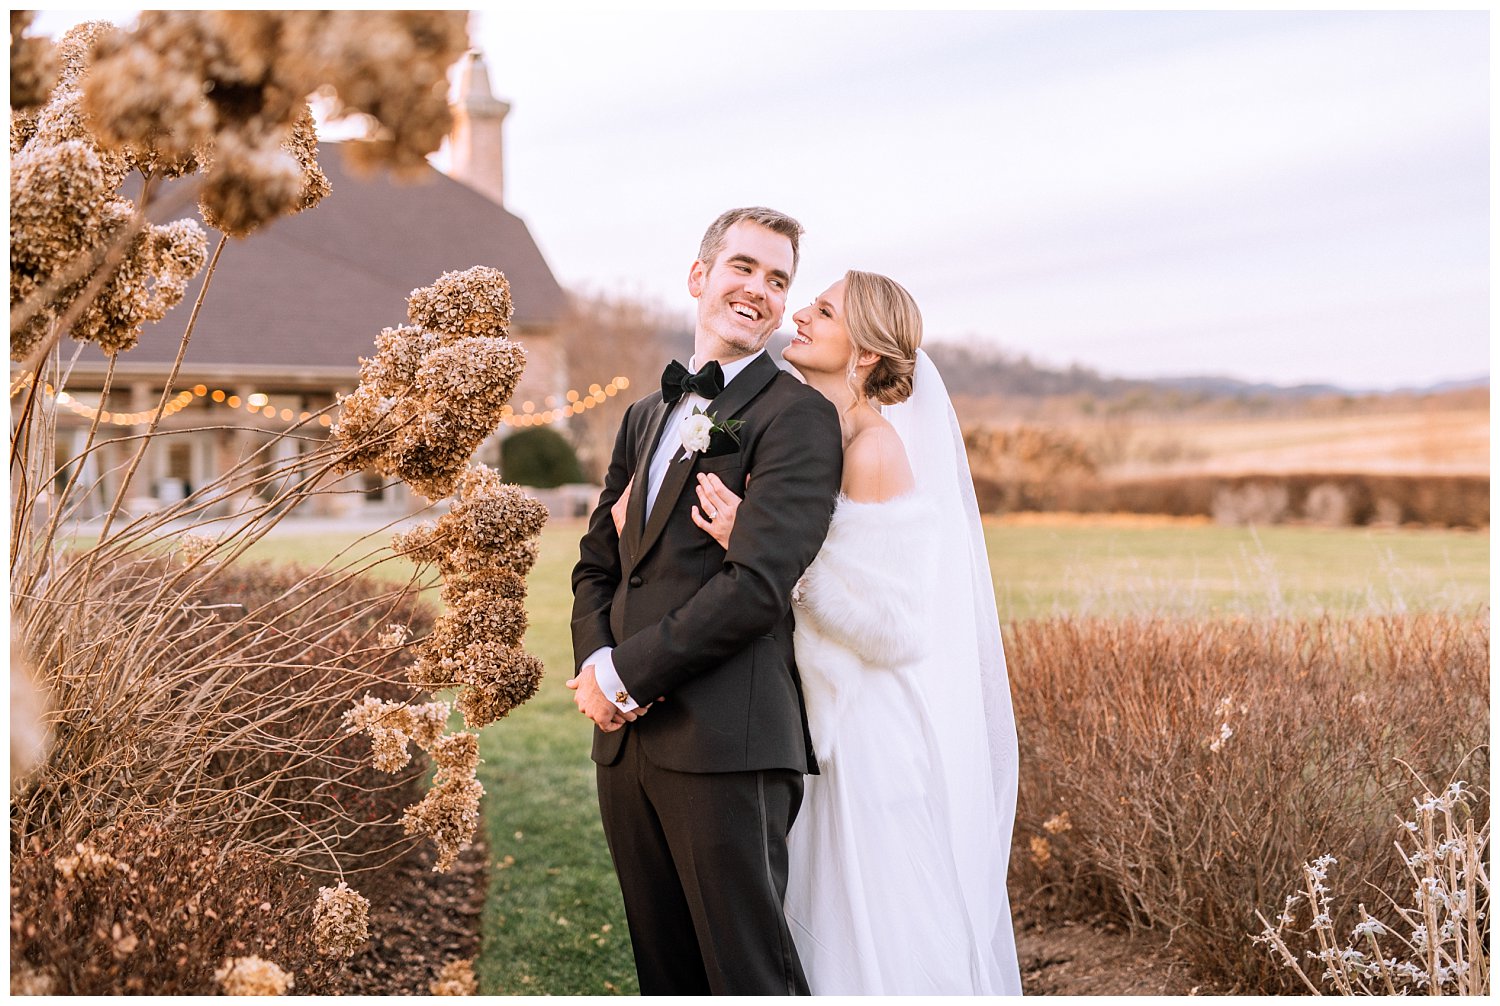 Newlywed sunset portraits at Early Mountain Vineyard in Charlottesville, Virginia